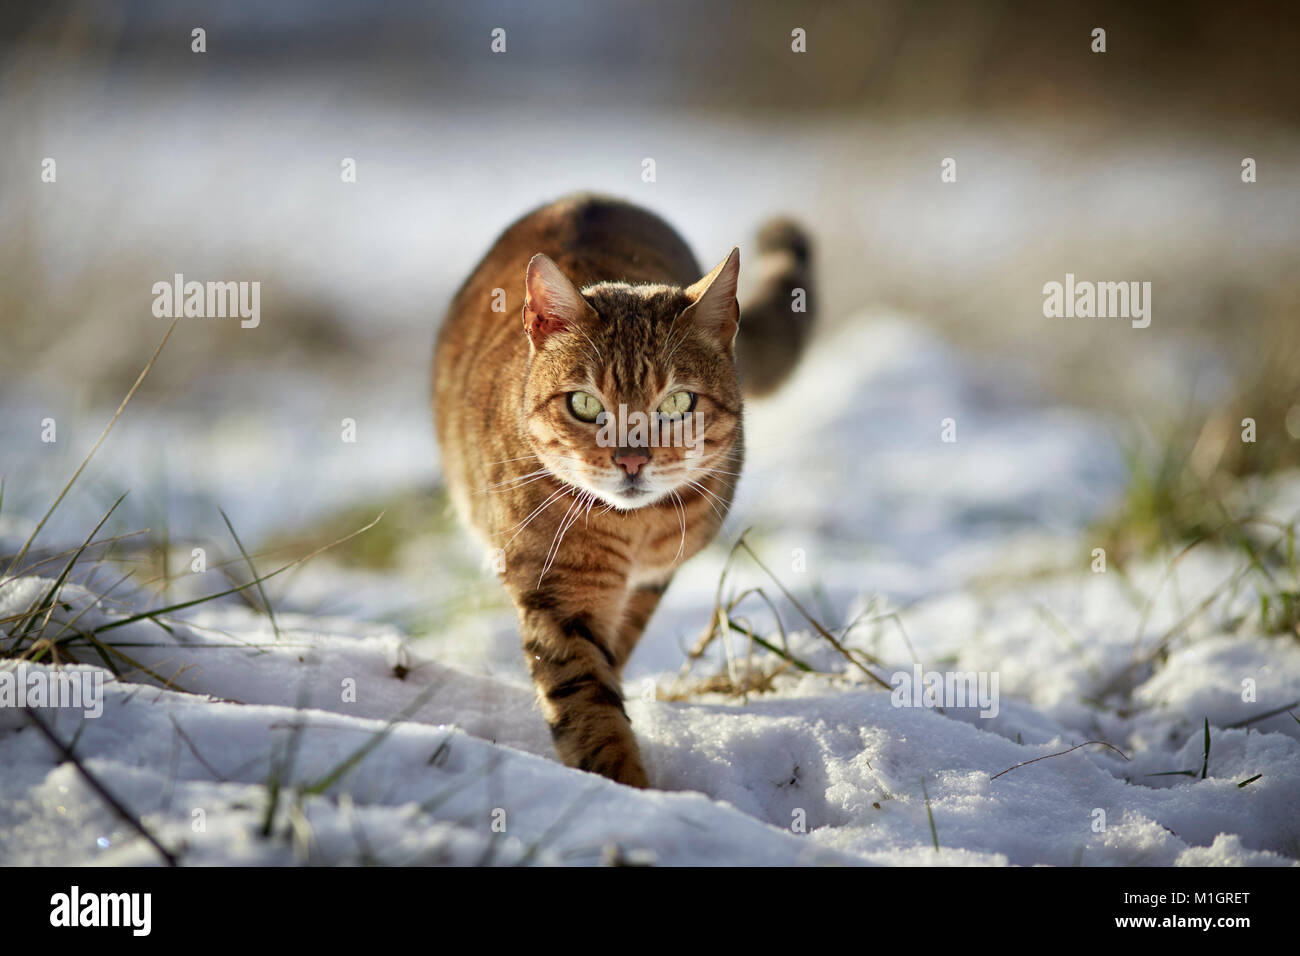 Bengal cat. Adult walking on snow. Germany Stock Photo